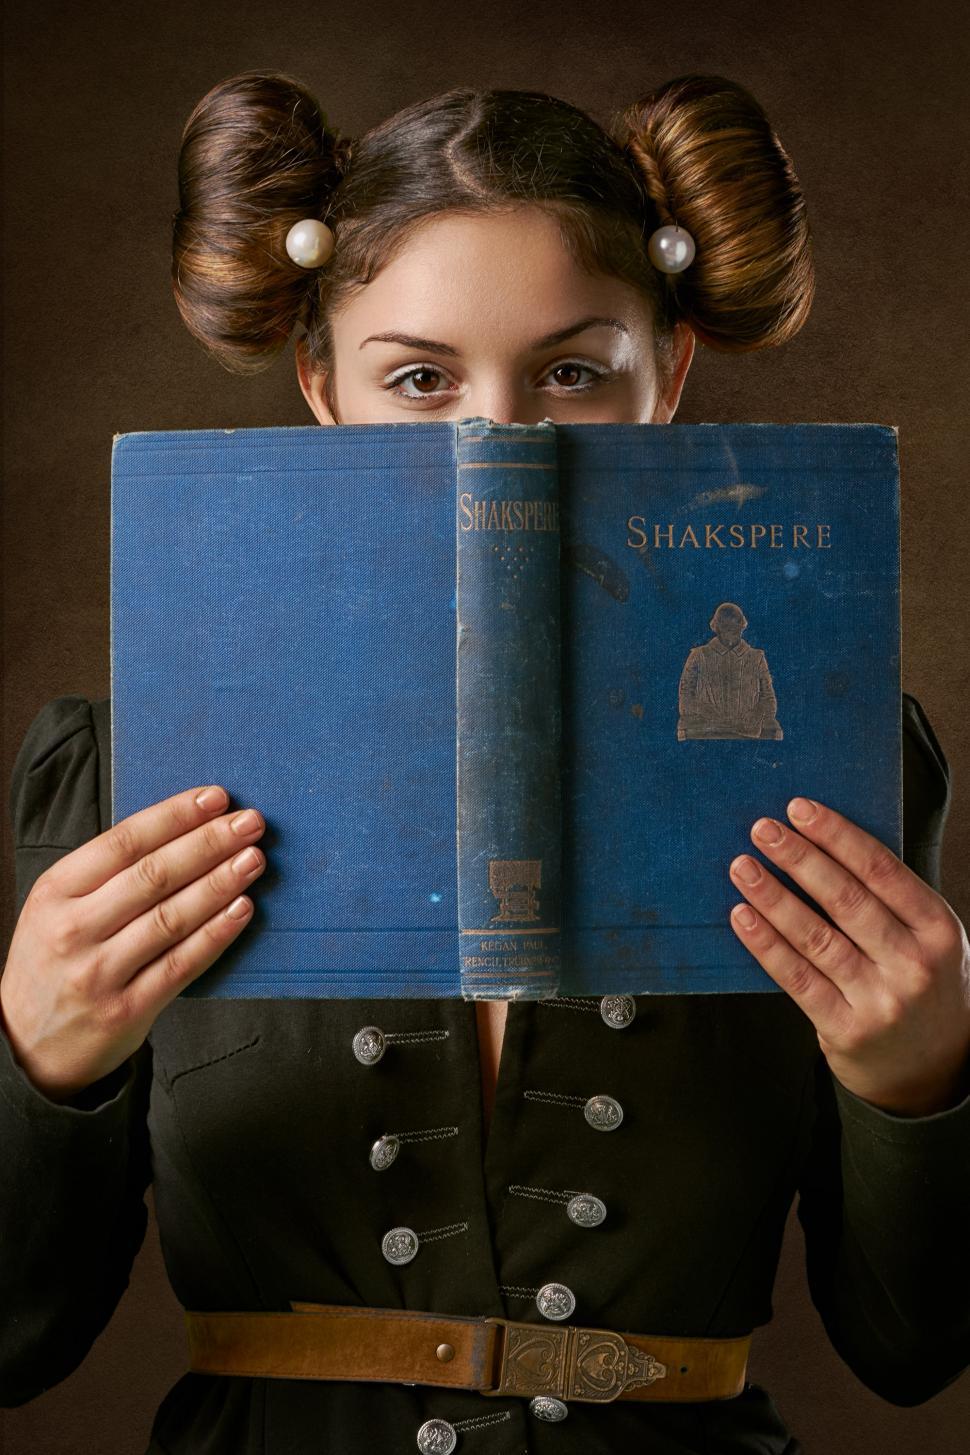 Free Image of Girl Smiling Behind a Book  